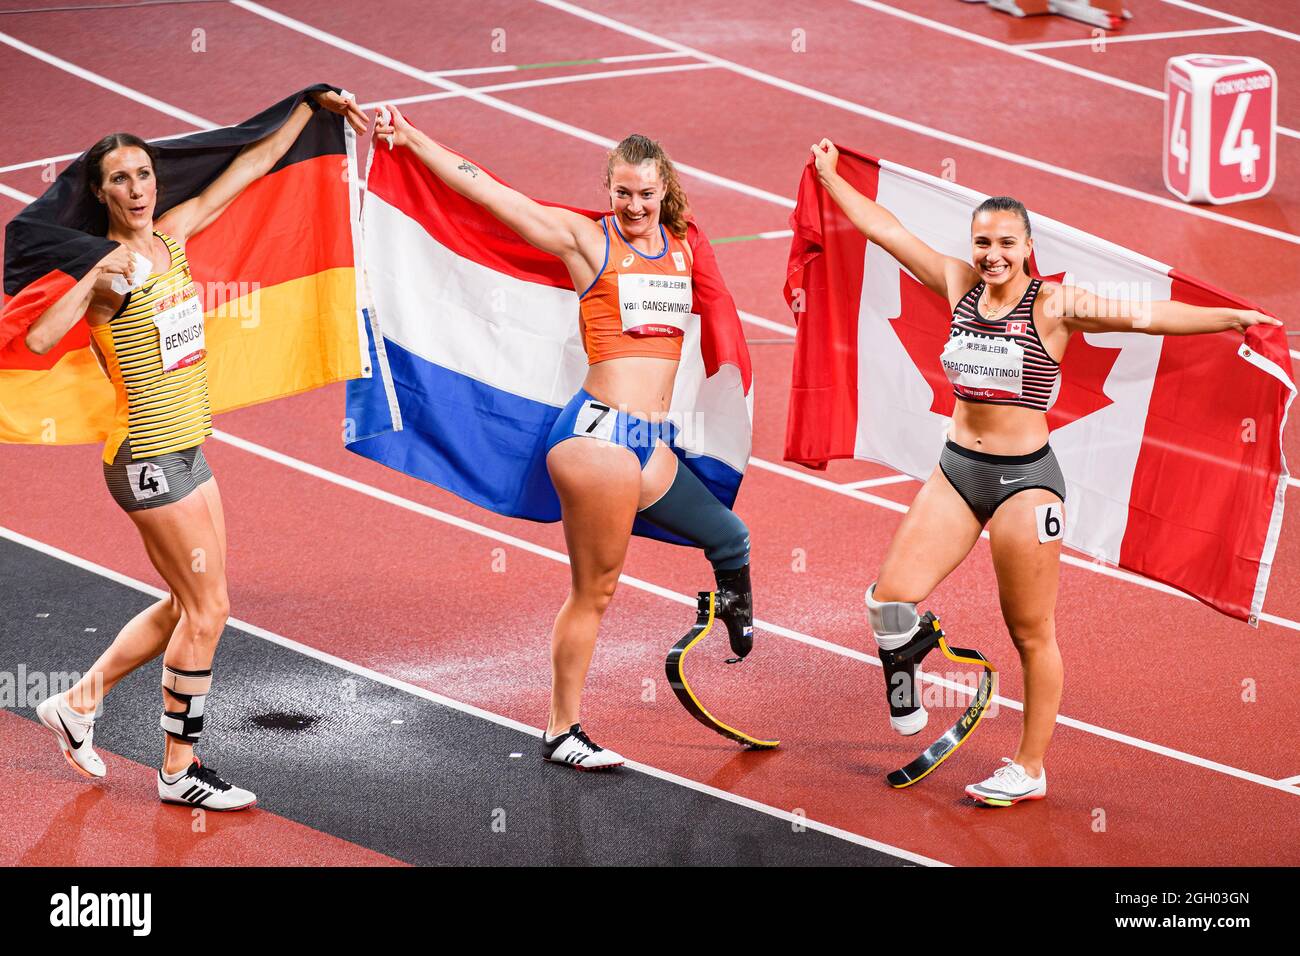 TOKYO, JAPAN. 03th Sep, 2021. (From left) Irmgard Bensusan (GER), Marlene van Gansewinkel (NED) and Marissa Papaconstantinou (CAN) during Track and Field events - Tokyo 2020 Paralympic games at Olympic Stadium on Friday, September 03, 2021 in TOKYO, JAPAN. Credit: Taka G Wu/Alamy Live News Stock Photo